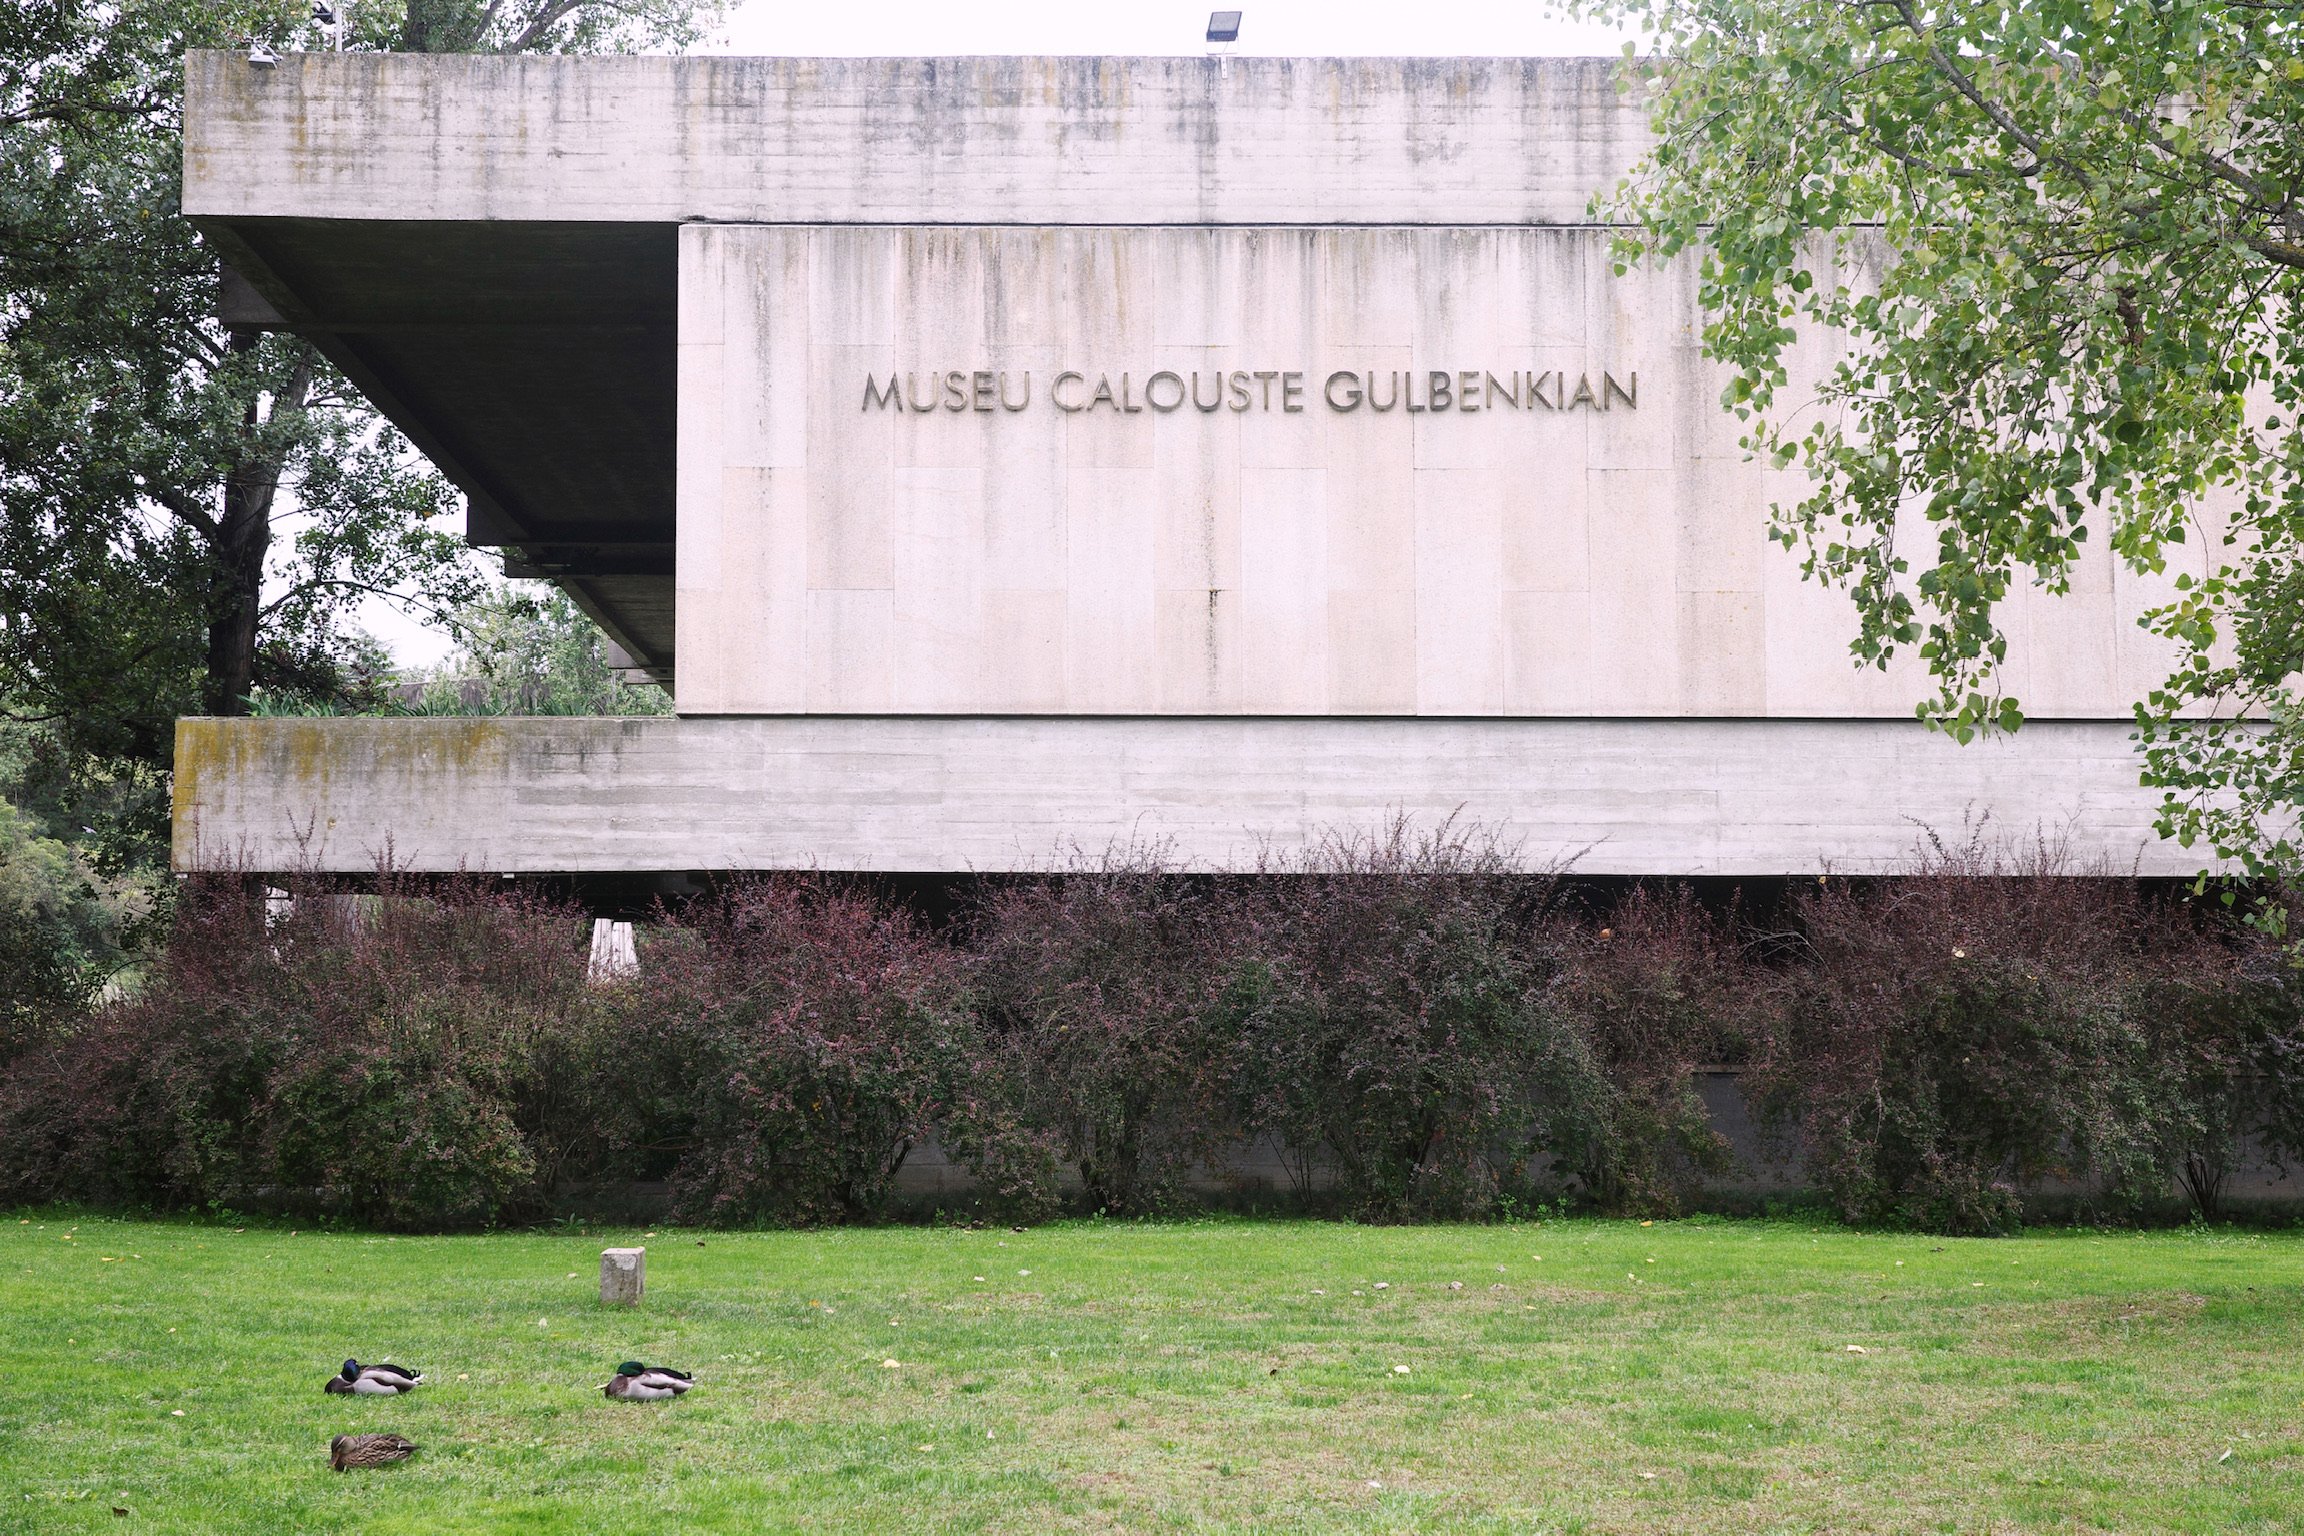 A lawn with a few ducks chilling on it, in front of a brutalist building with text on the exterior wall that reads MUSEU CALOUSTE GULBENKIAN.